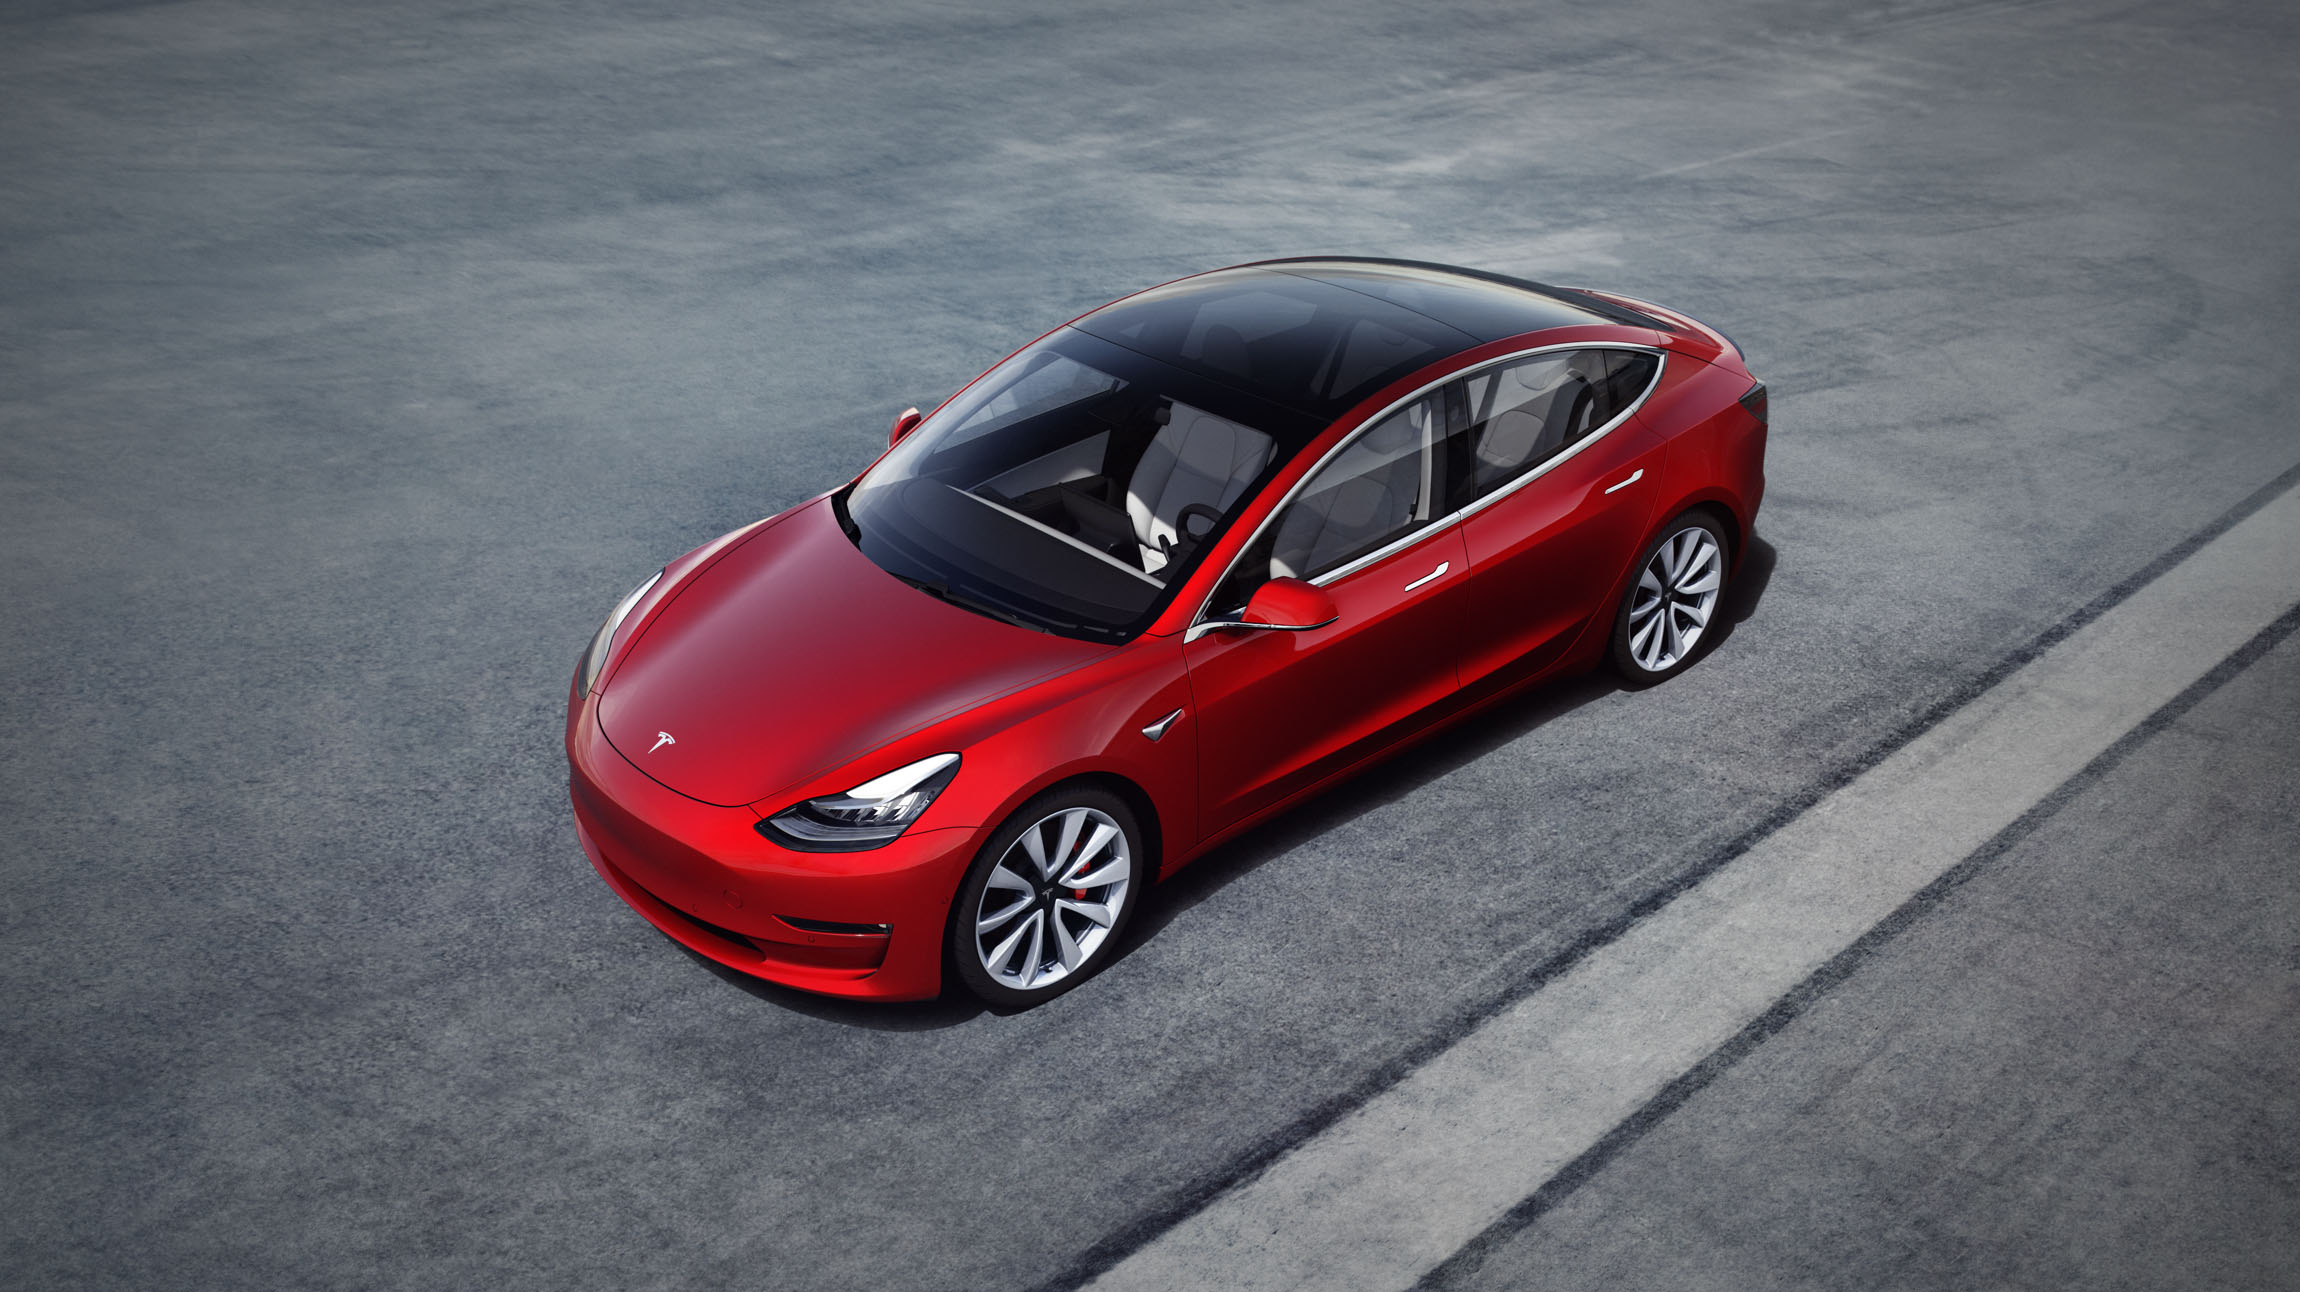 Elon Musk: There is not a demand problem for the Tesla Model 3